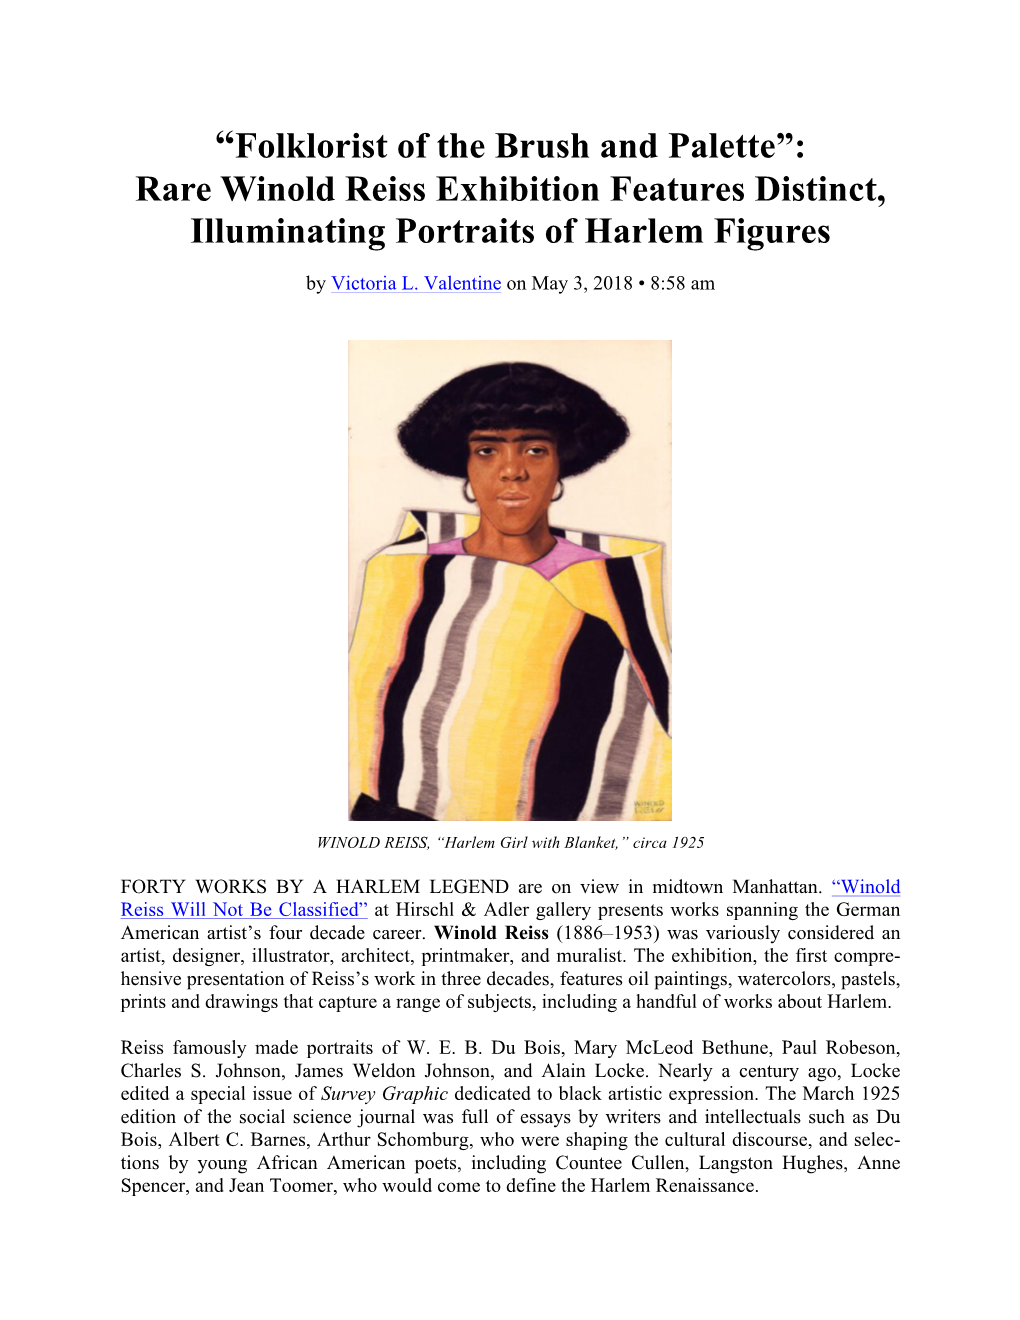 Folklorist of the Brush and Palette: Rare Winold Reiss Exhibition